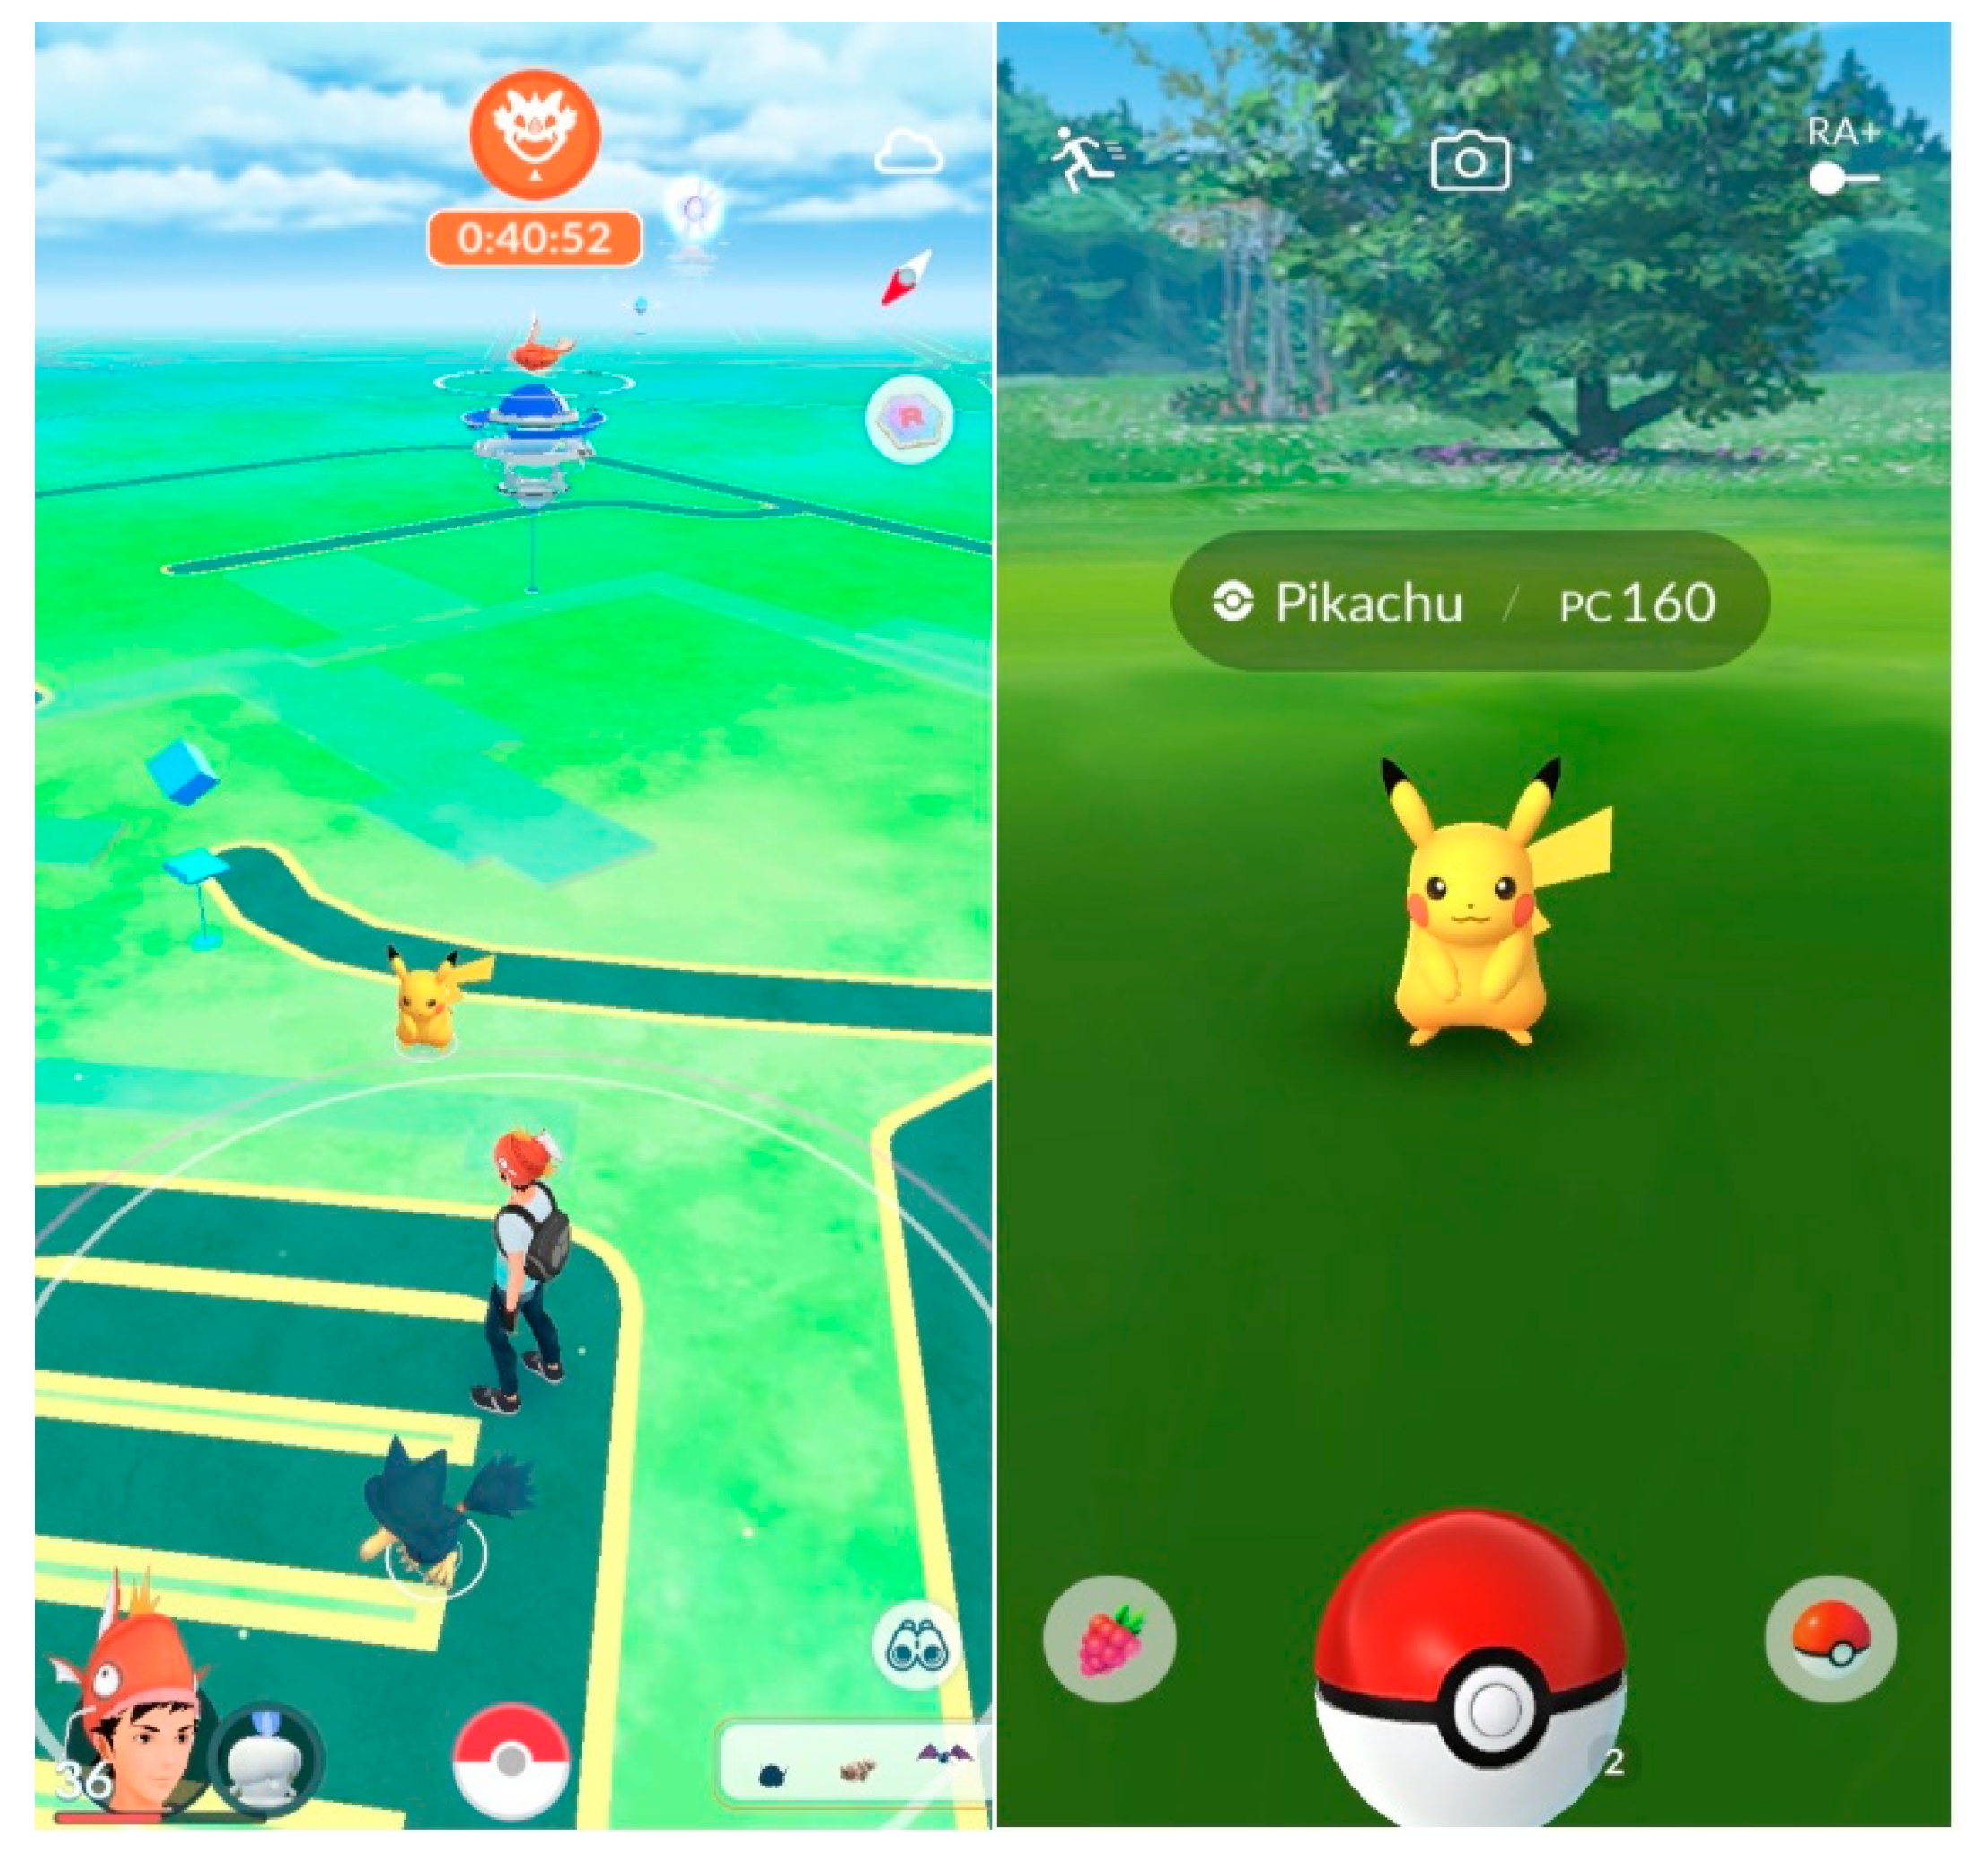 Applied Sciences Free Full Text Uses And Gratifications On Augmented Reality Games An Examination Of Pokemon Go Html